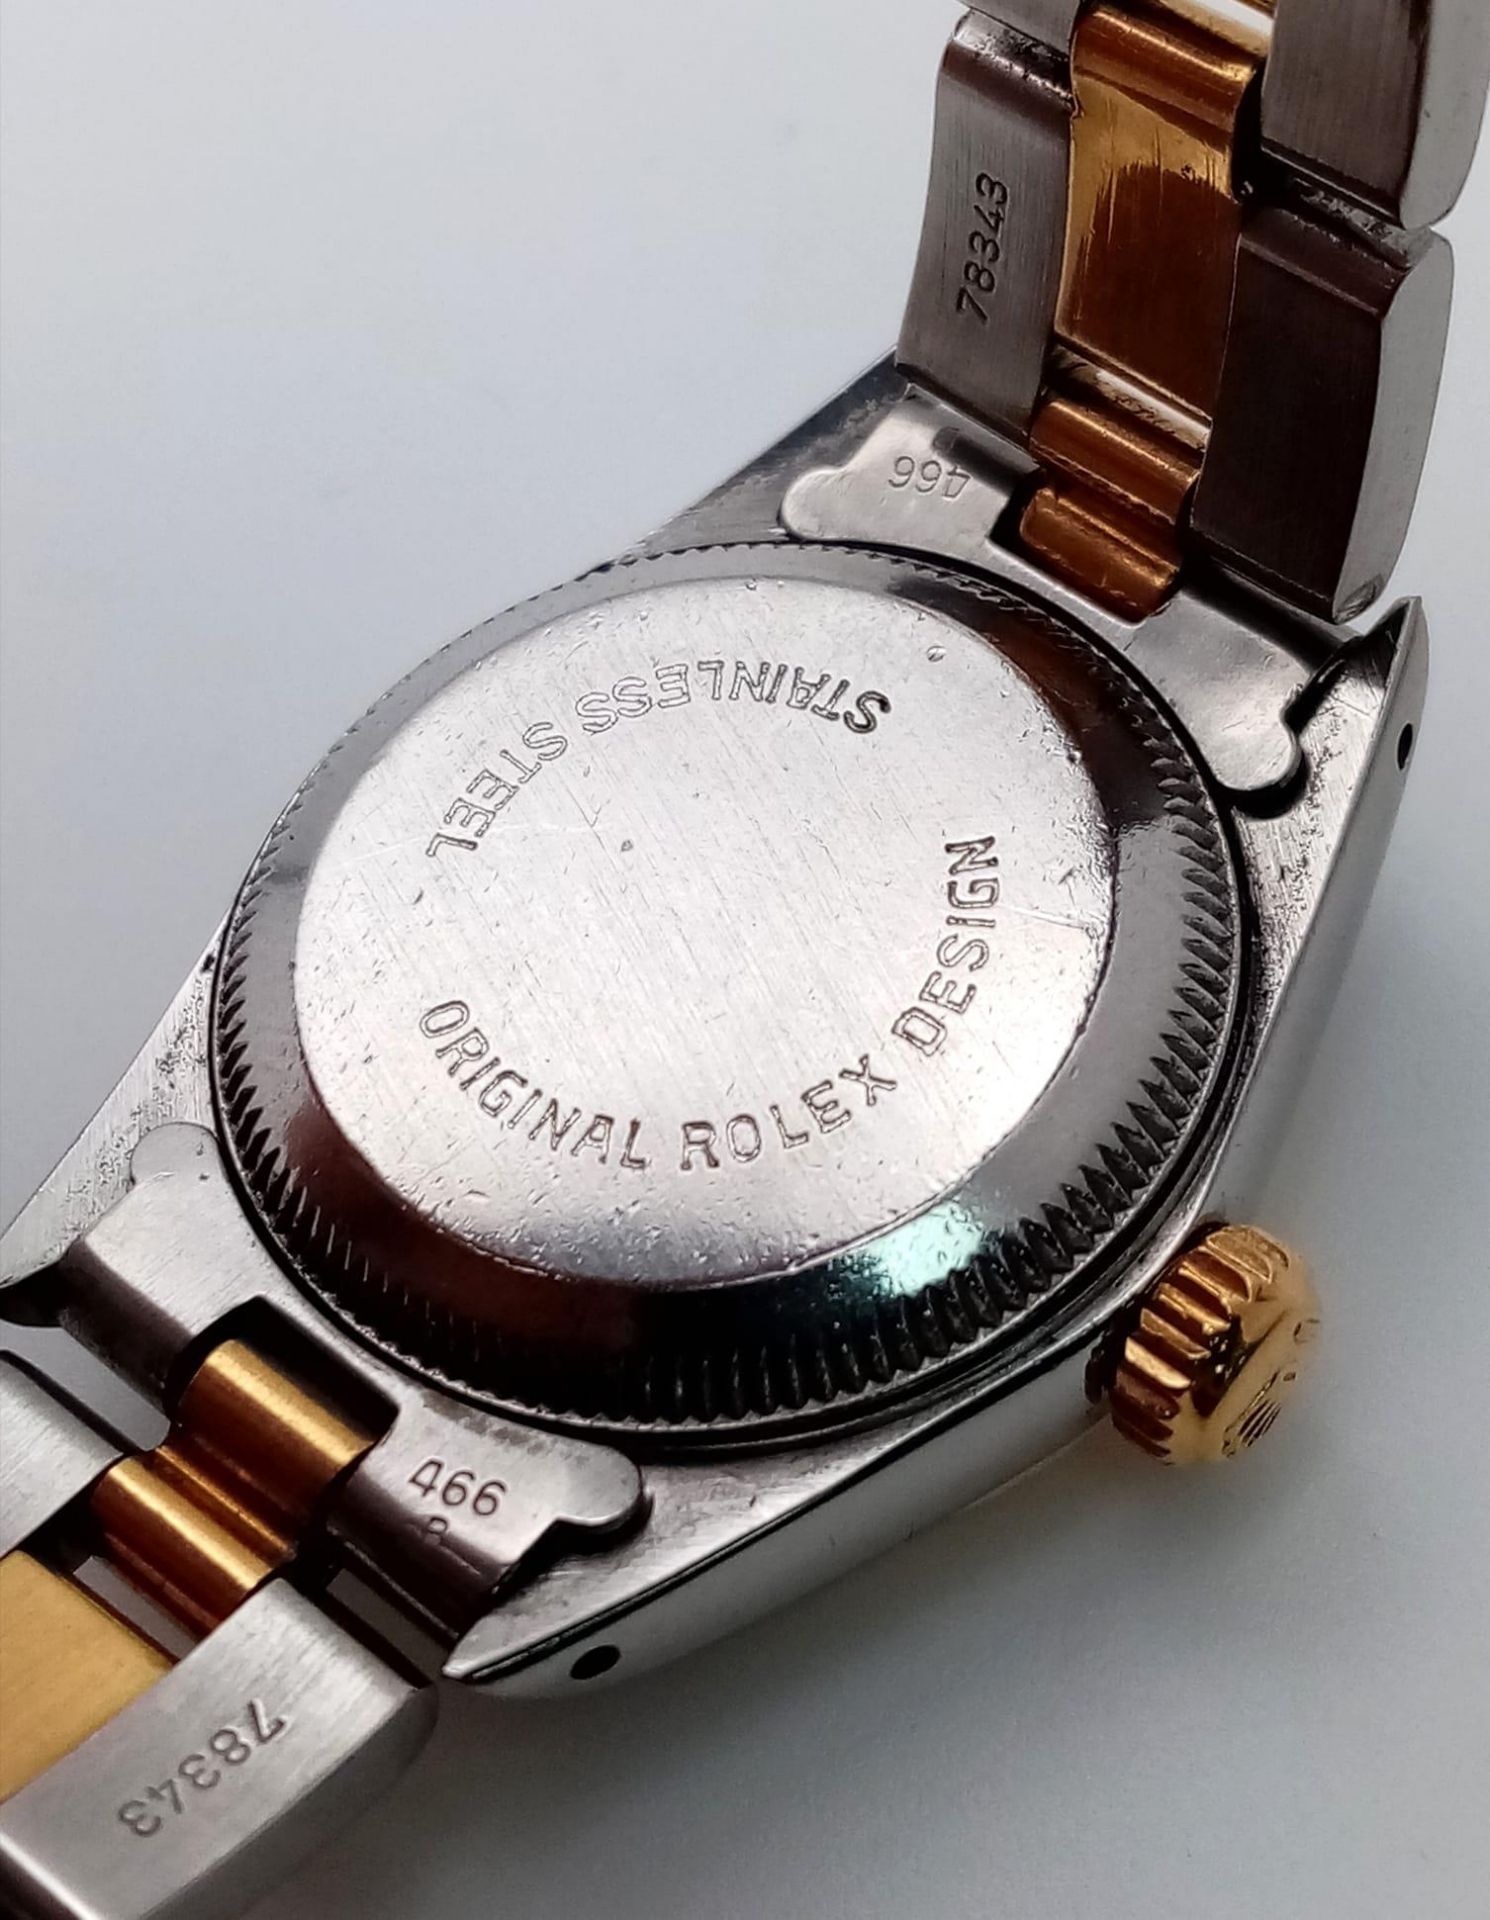 A ROLEX LADIES BI-METAL AUTOMATIC WATCH WITH GOLDTONE DIAL , LATEST STYLE STRAP AND ORIGINAL ROLEX - Image 6 of 8